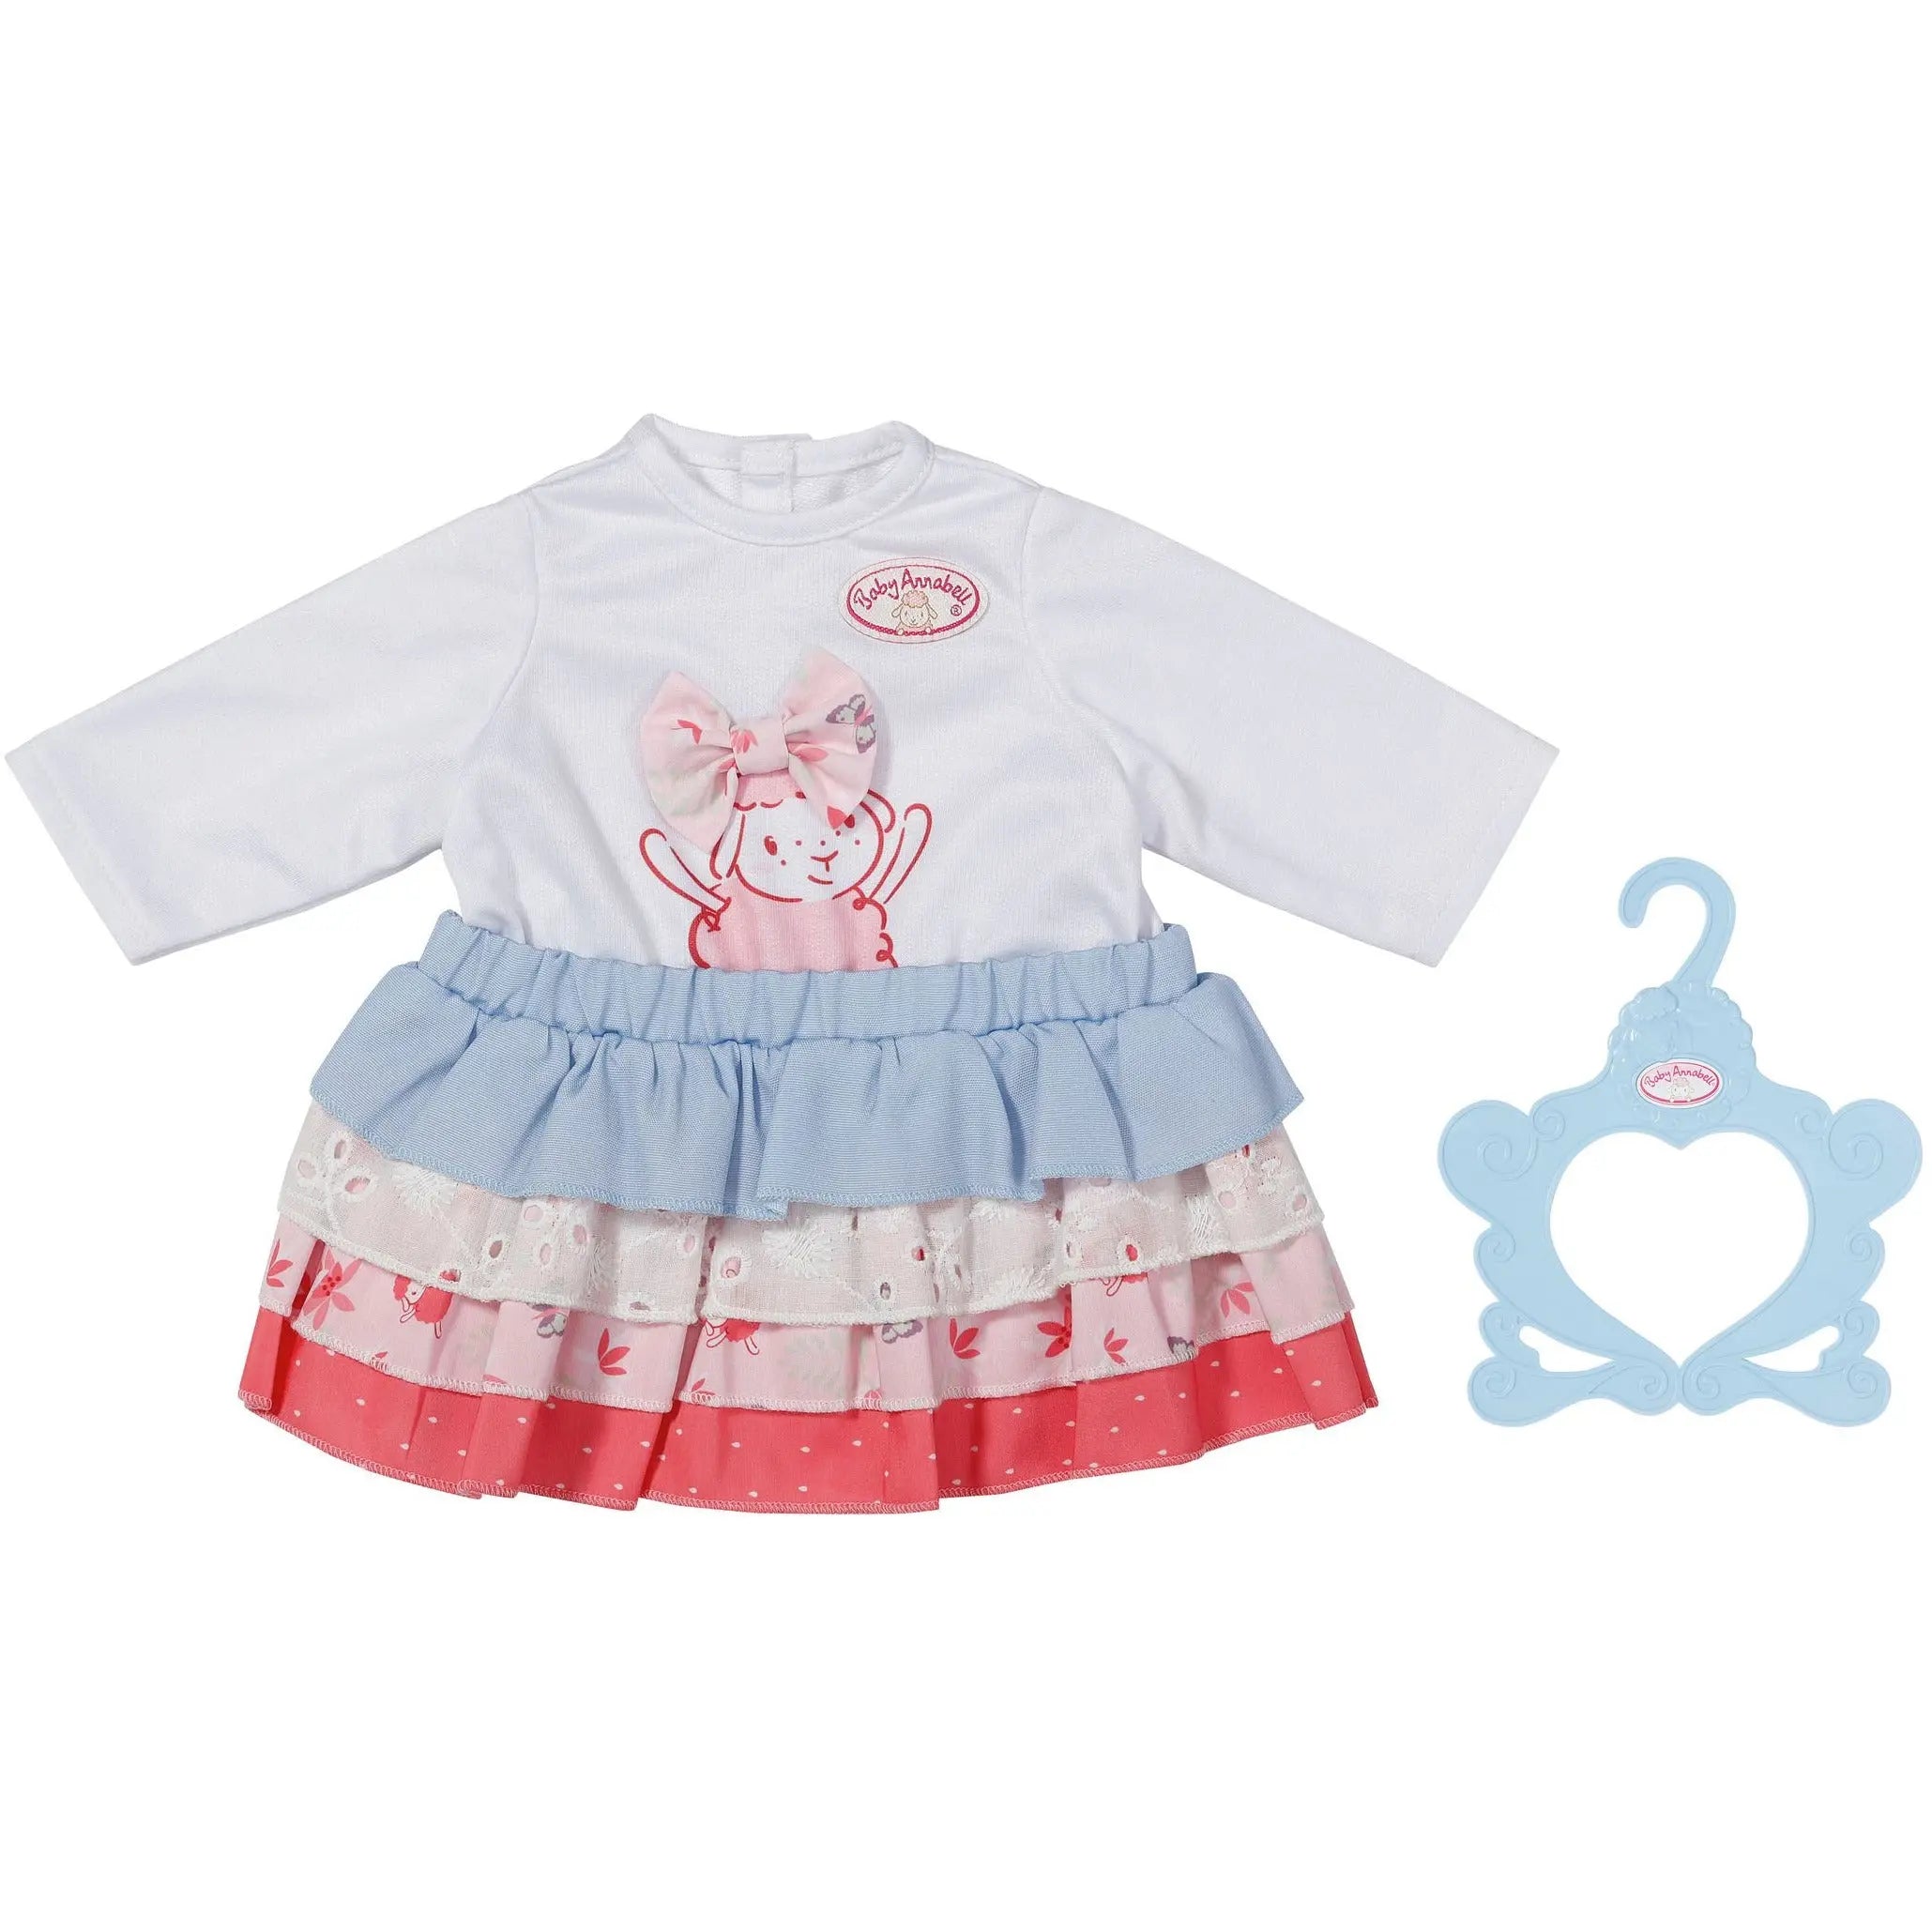 Baby Annabell Outfit Skirt 43cm Baby Annabell